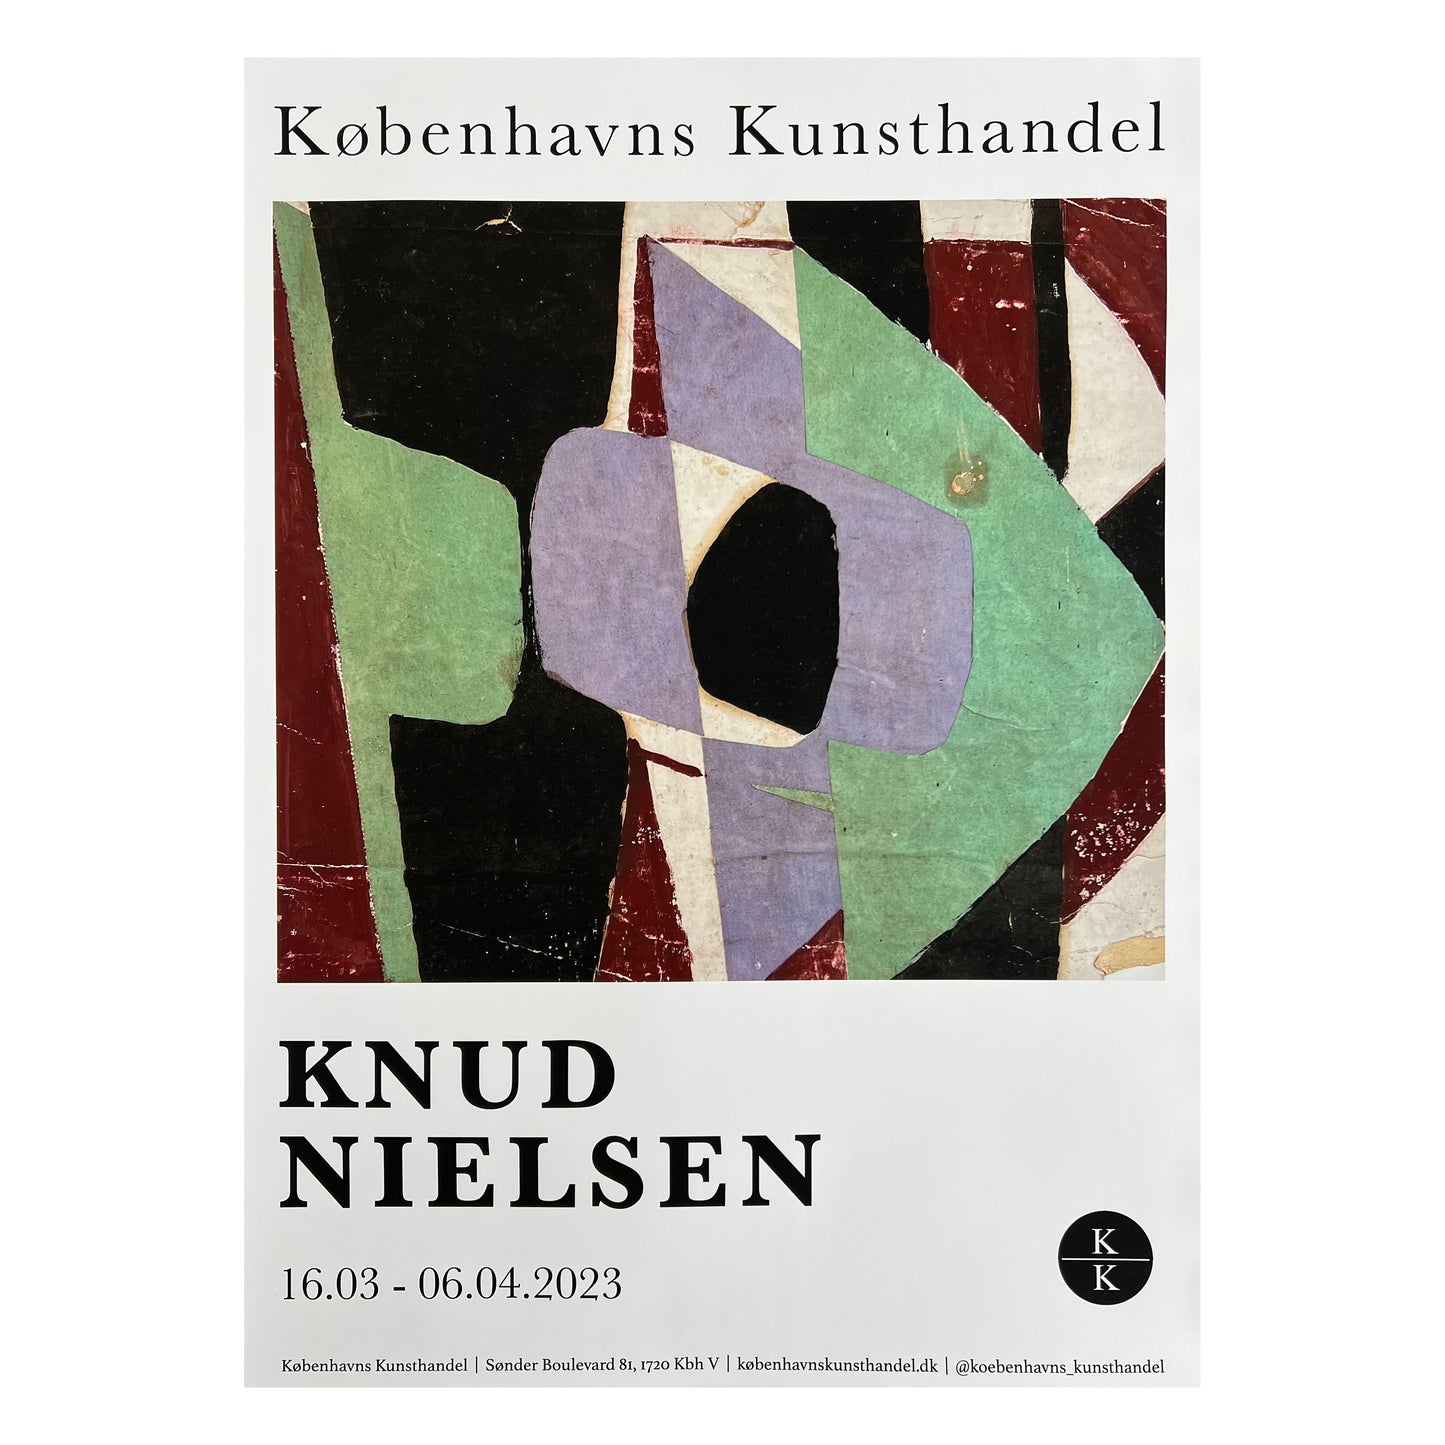 Knud Nielsen. Exhibition poster, 2023